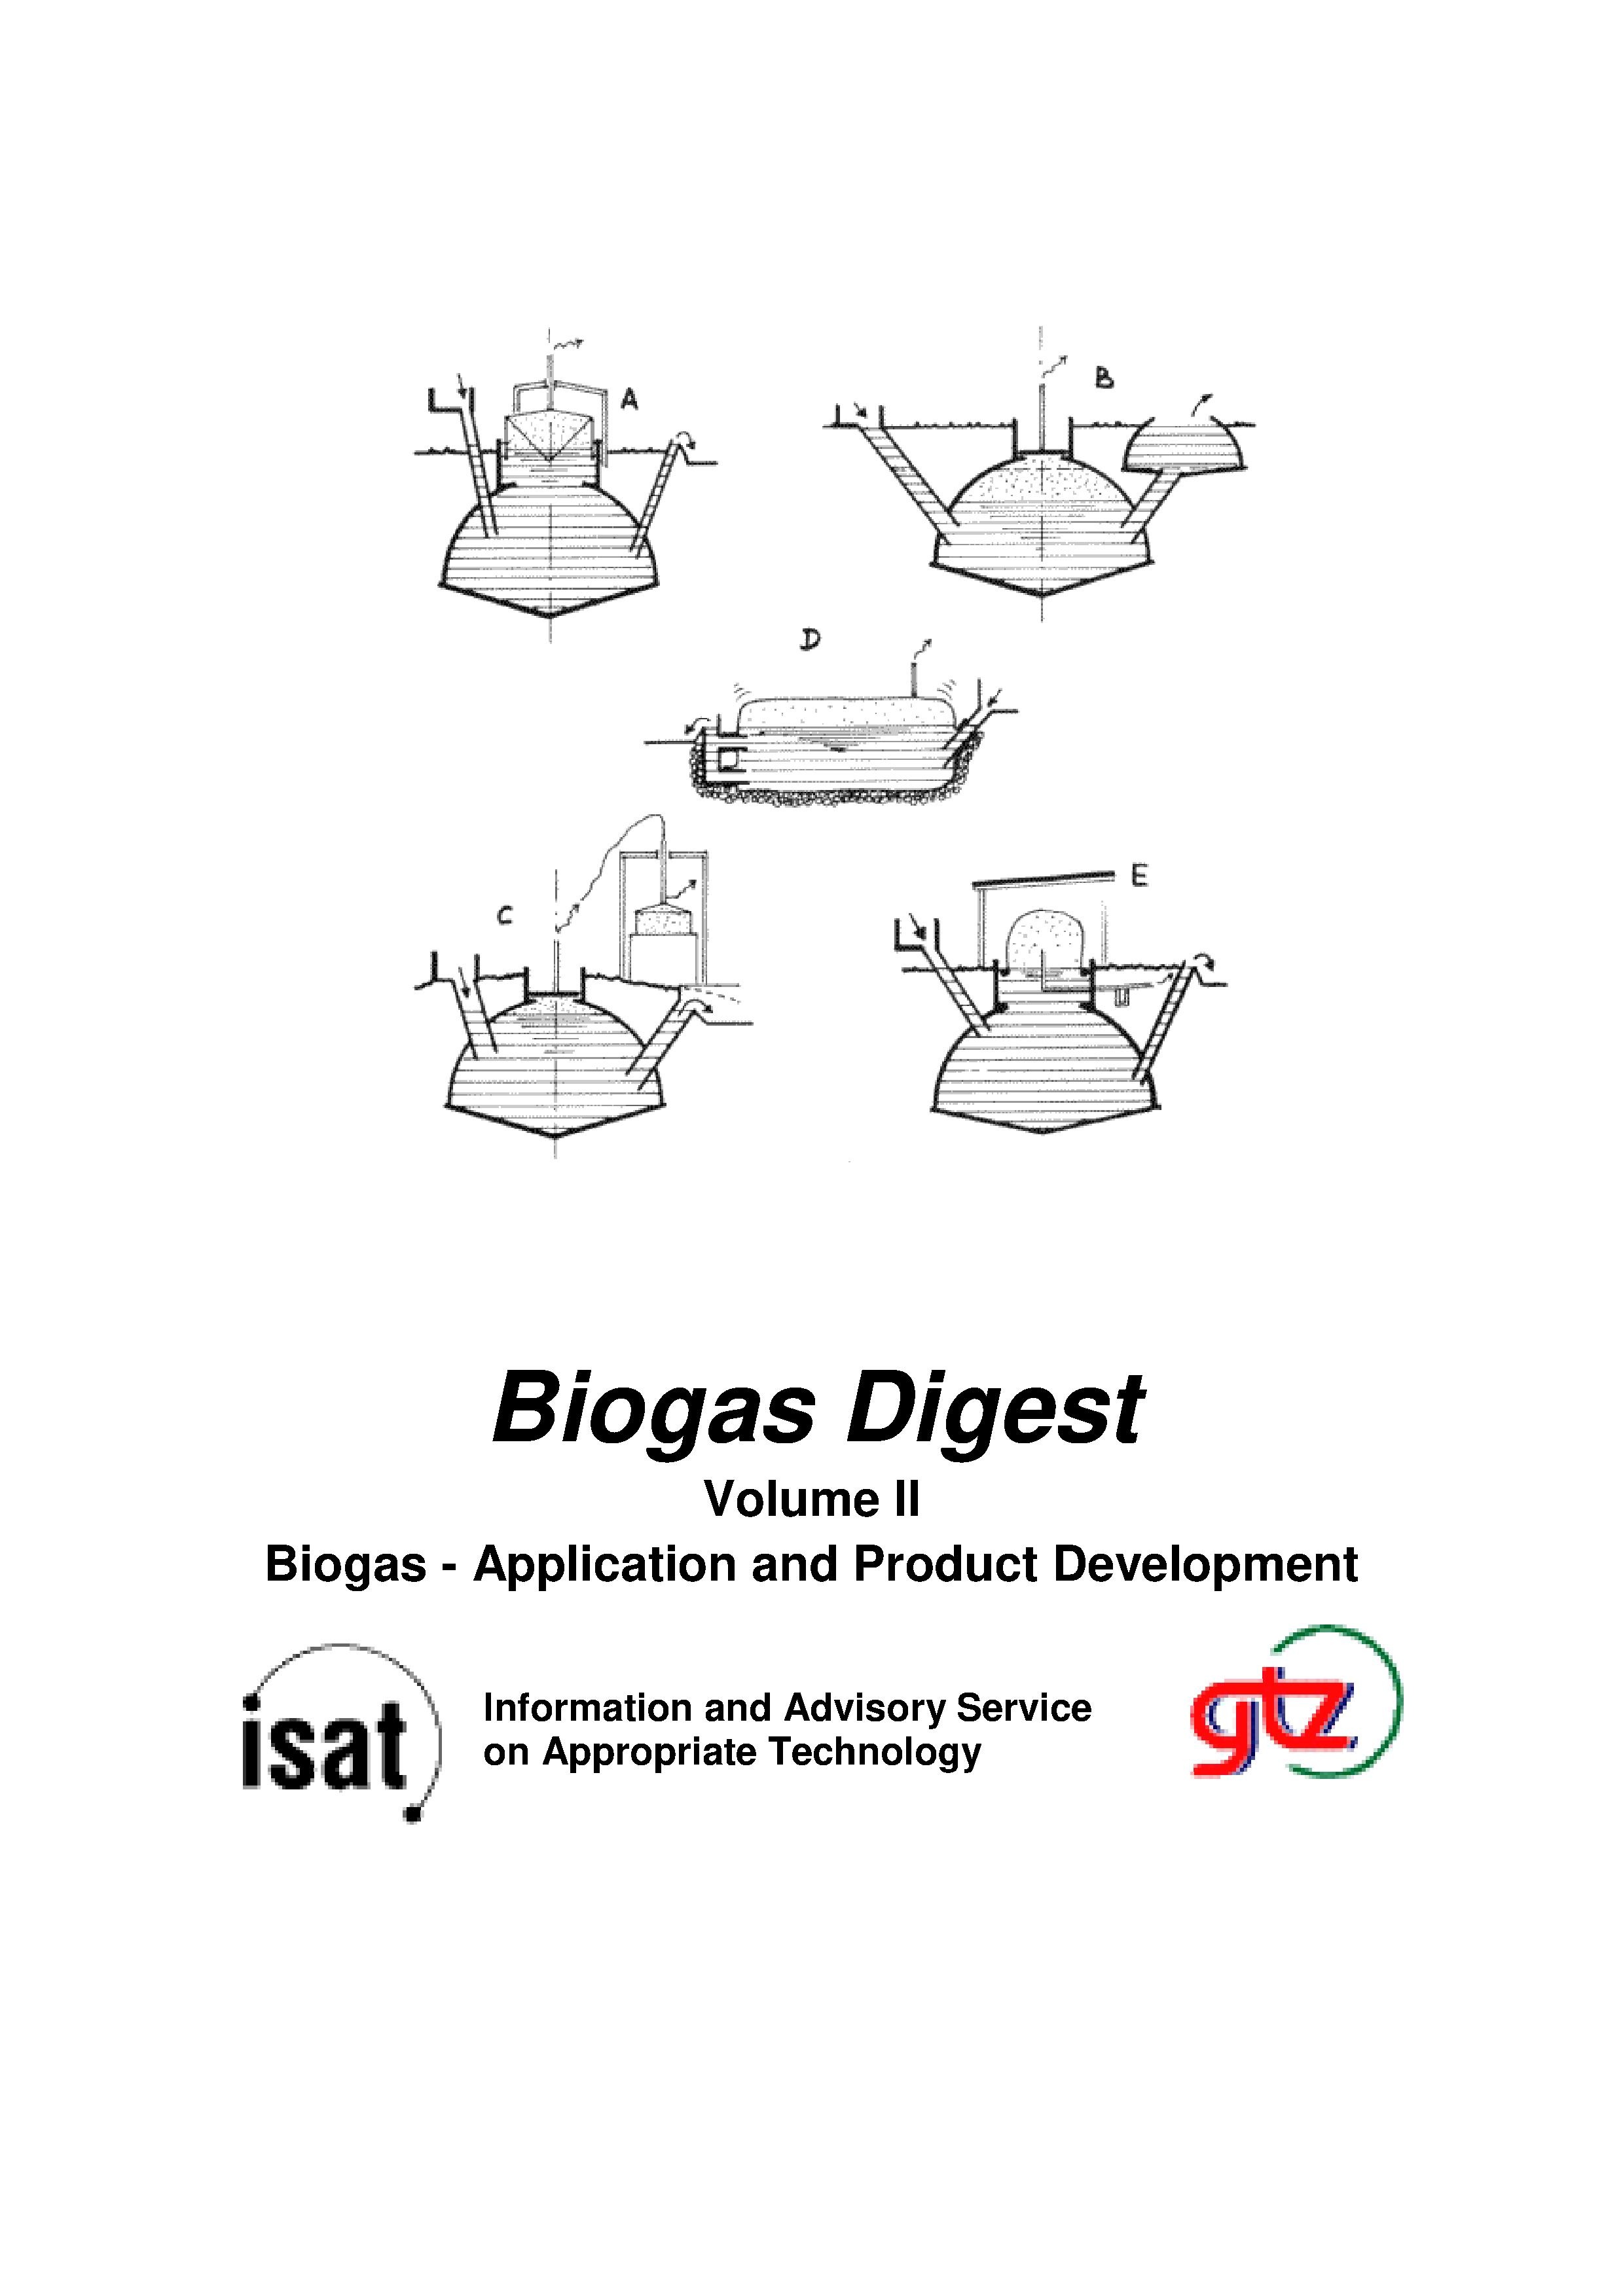 Biogas Digest Volume II: Biogas - Application and Product Development